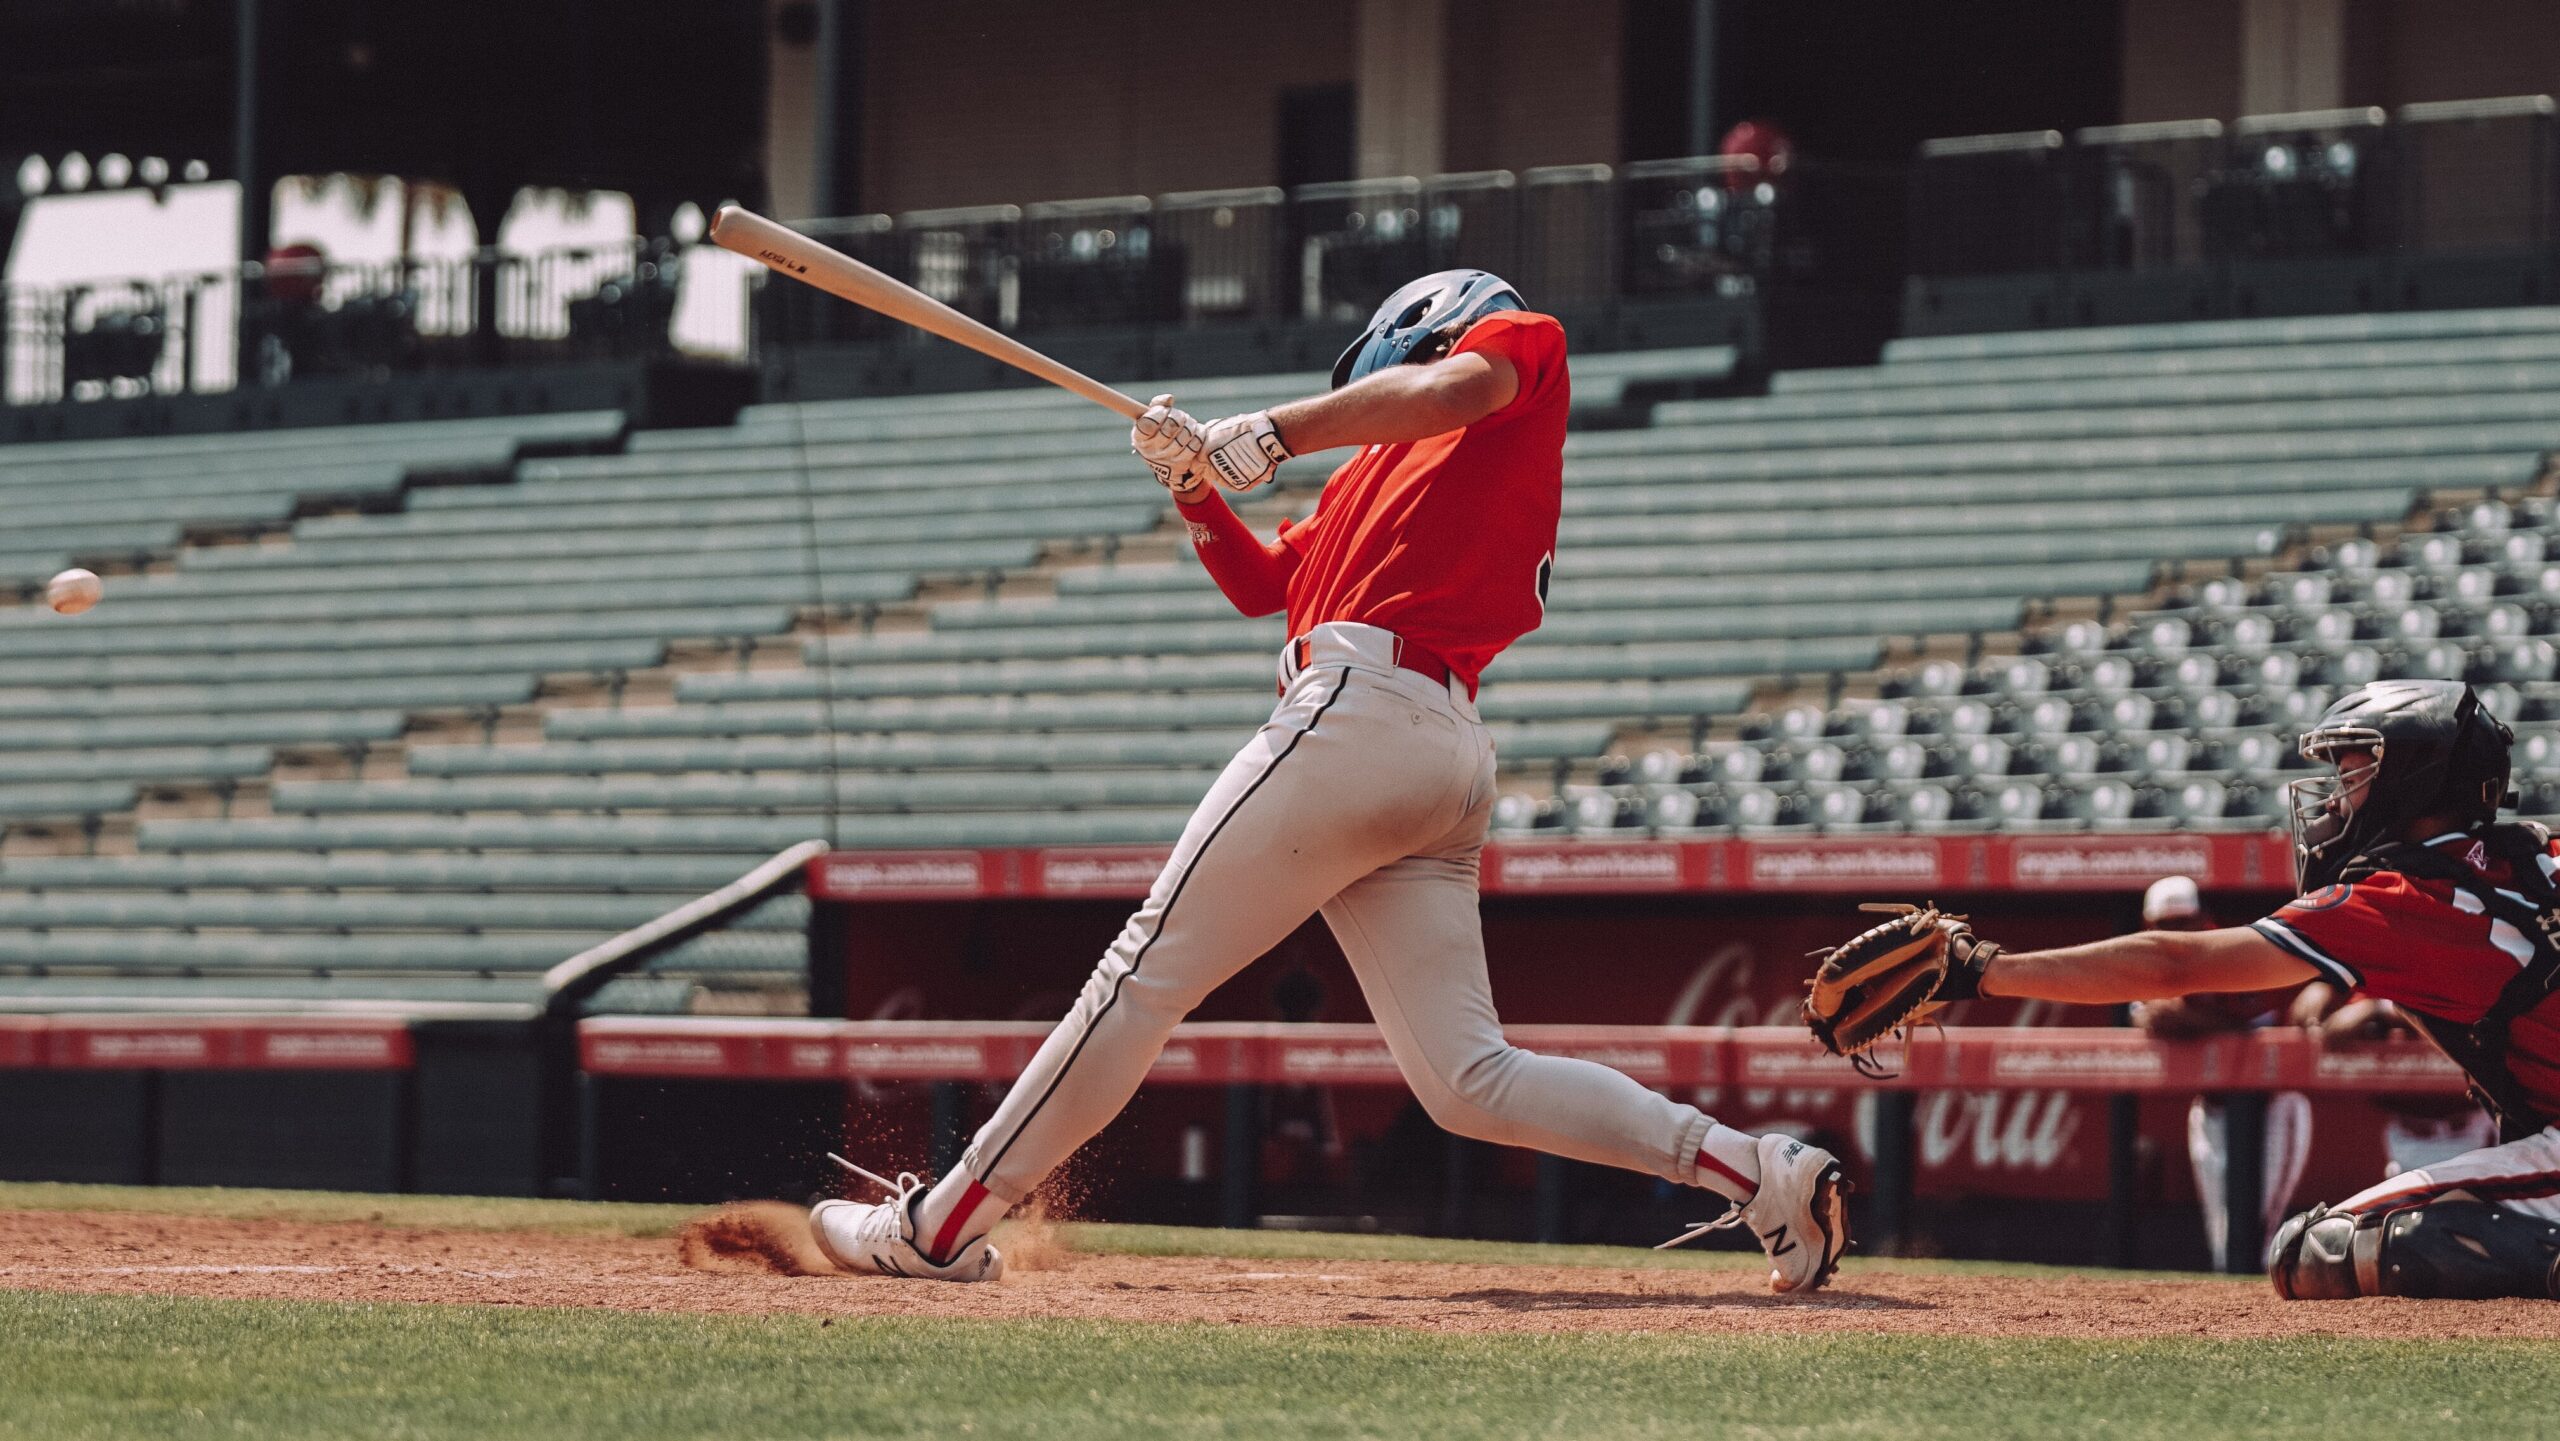 a photo of a baseball player mid-swing